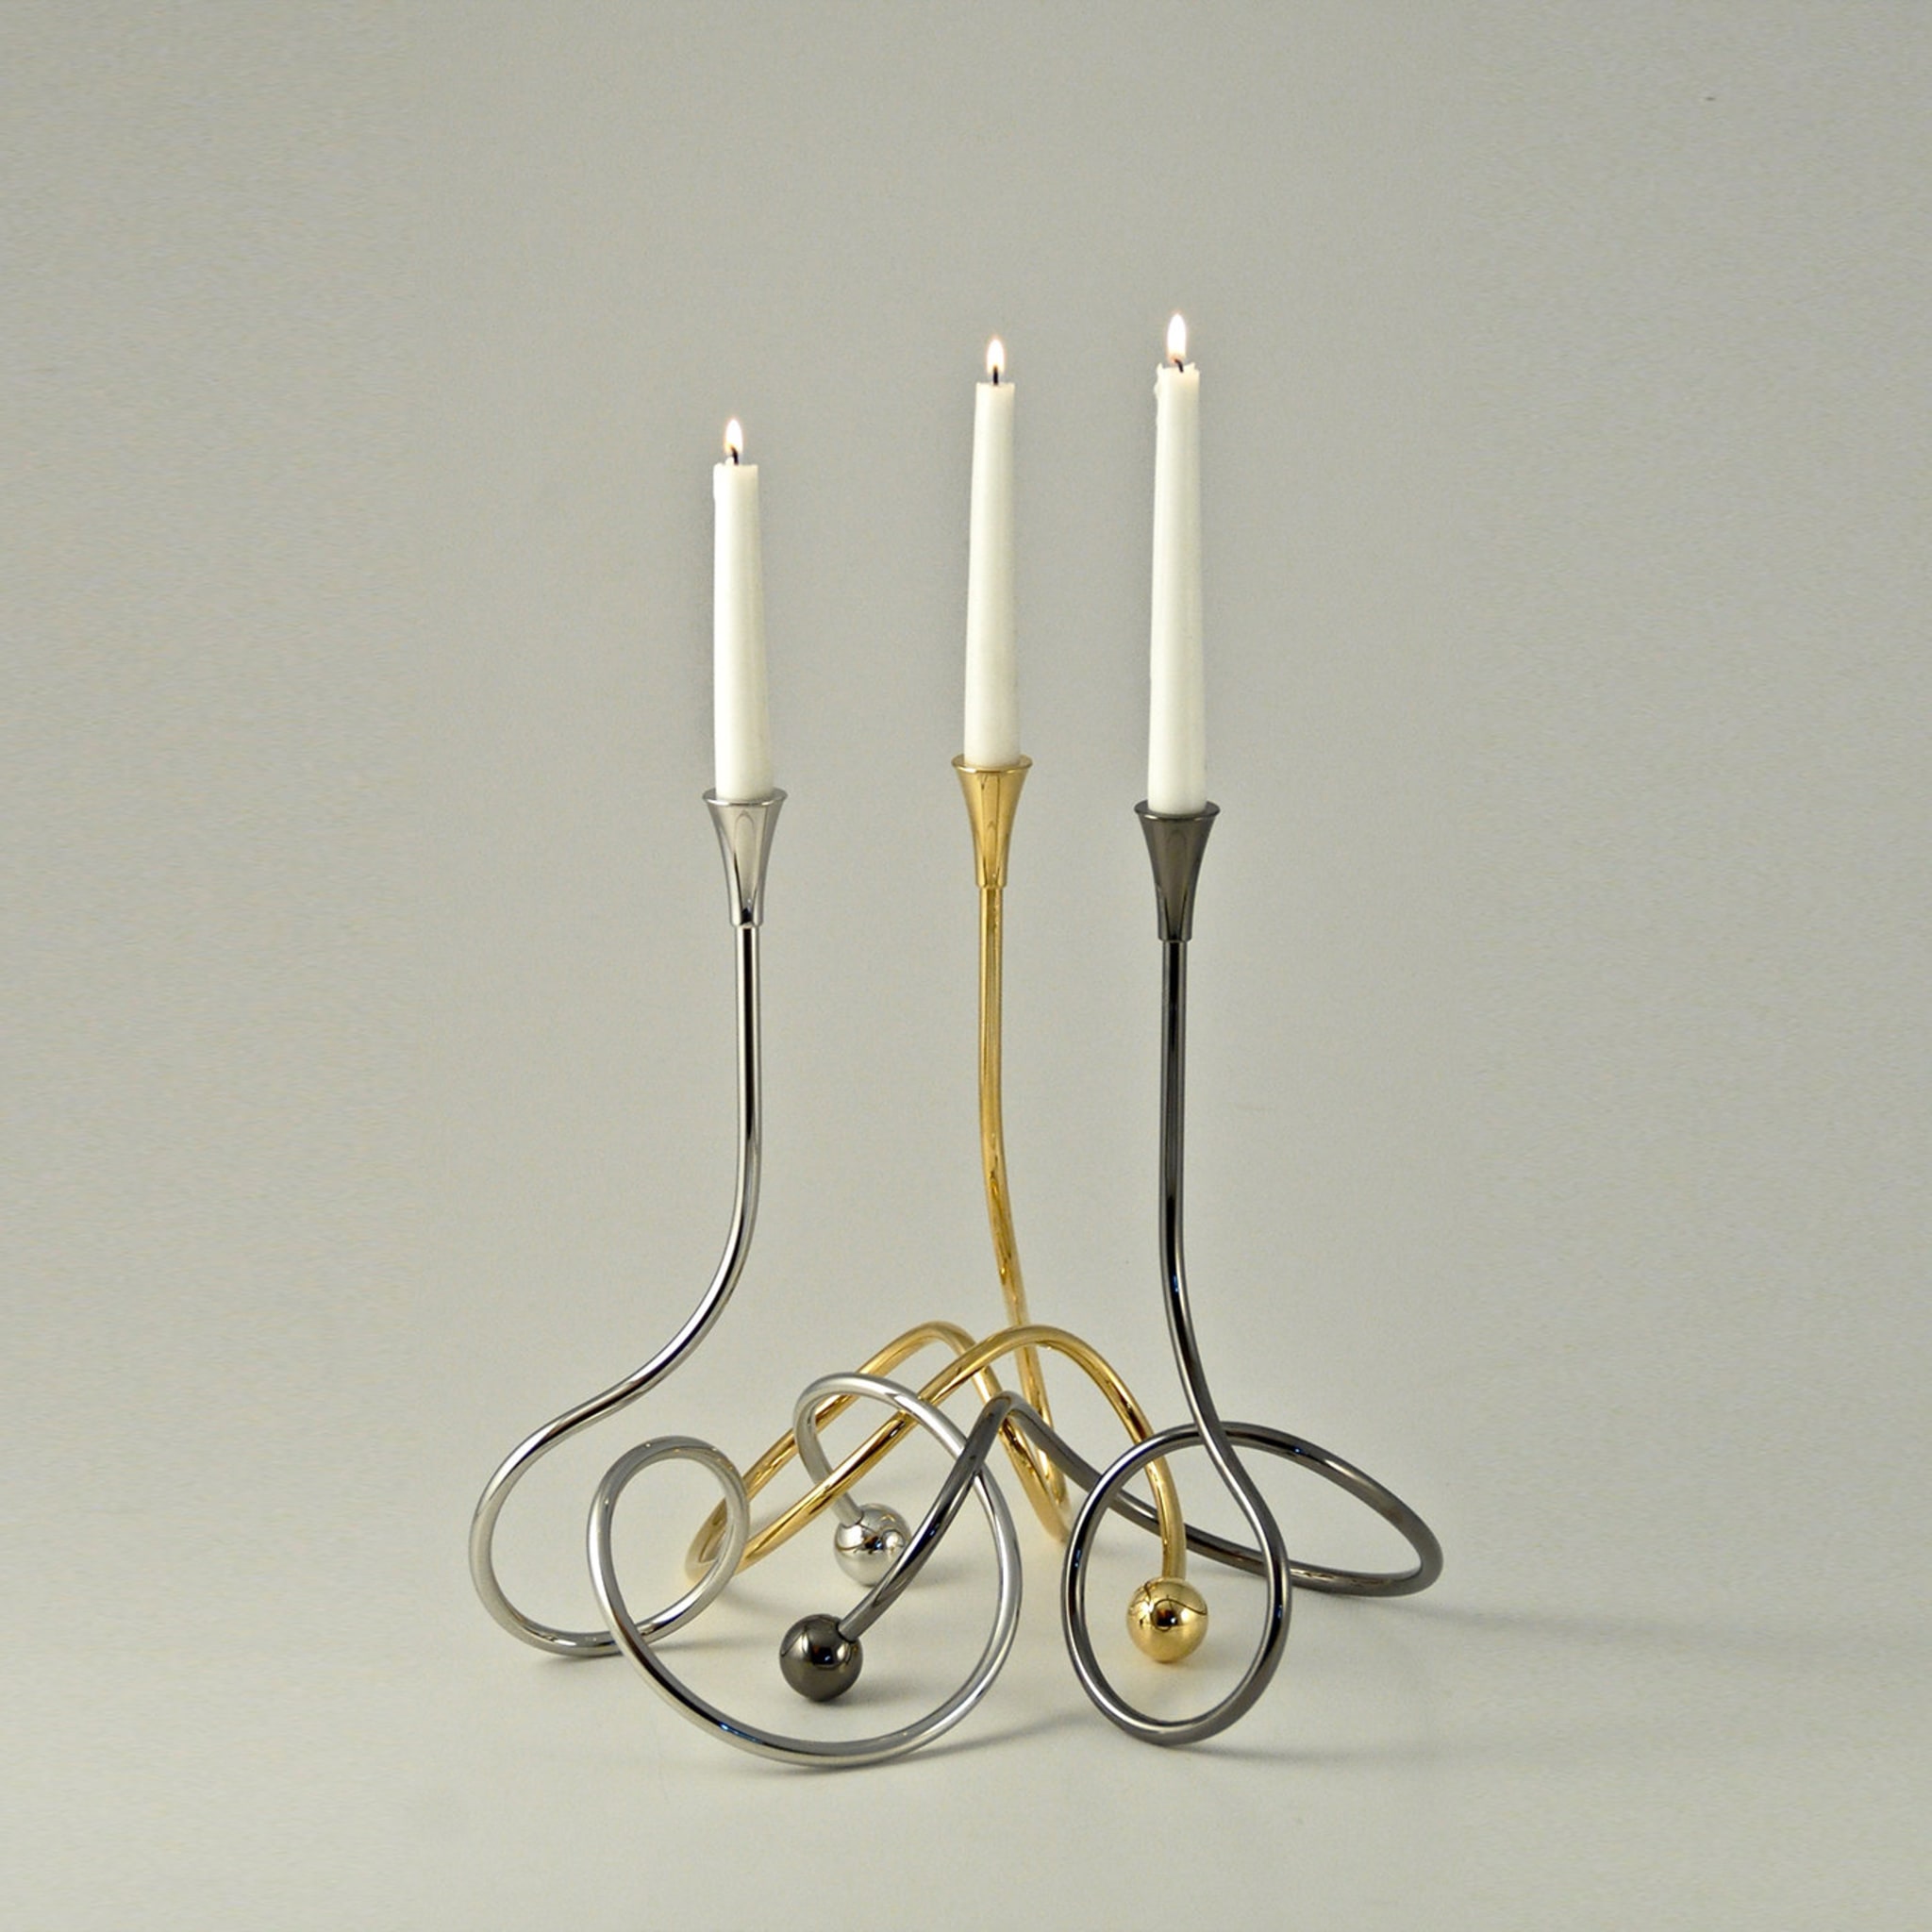 Malibù Set of 3 Candle Holders - Alternative view 2